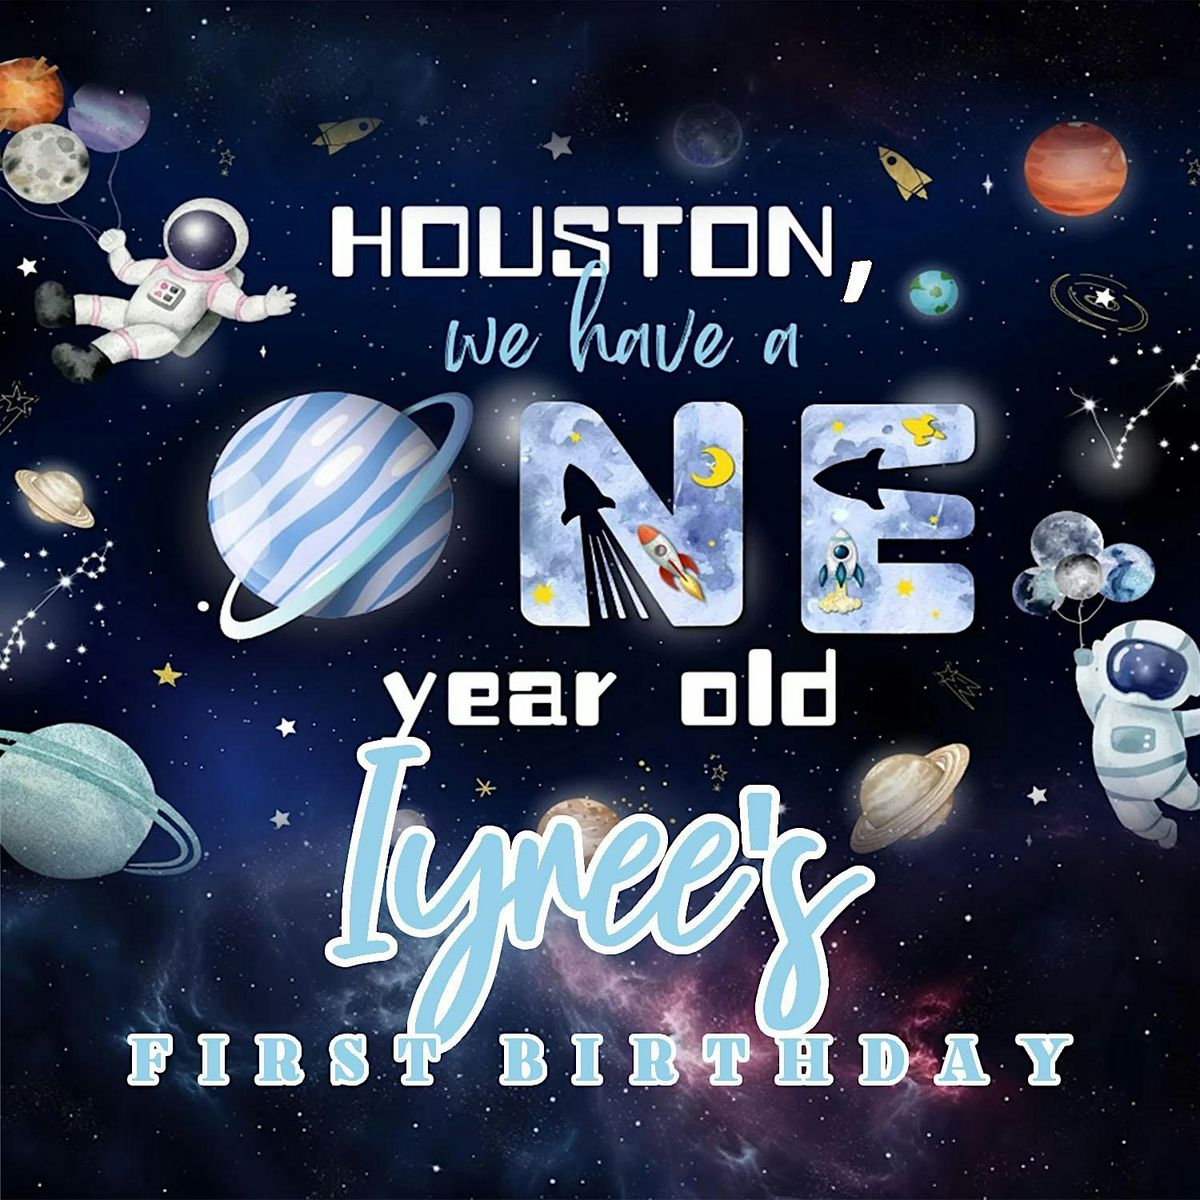 Iyree\u2019s Houston We Have A One Year Old